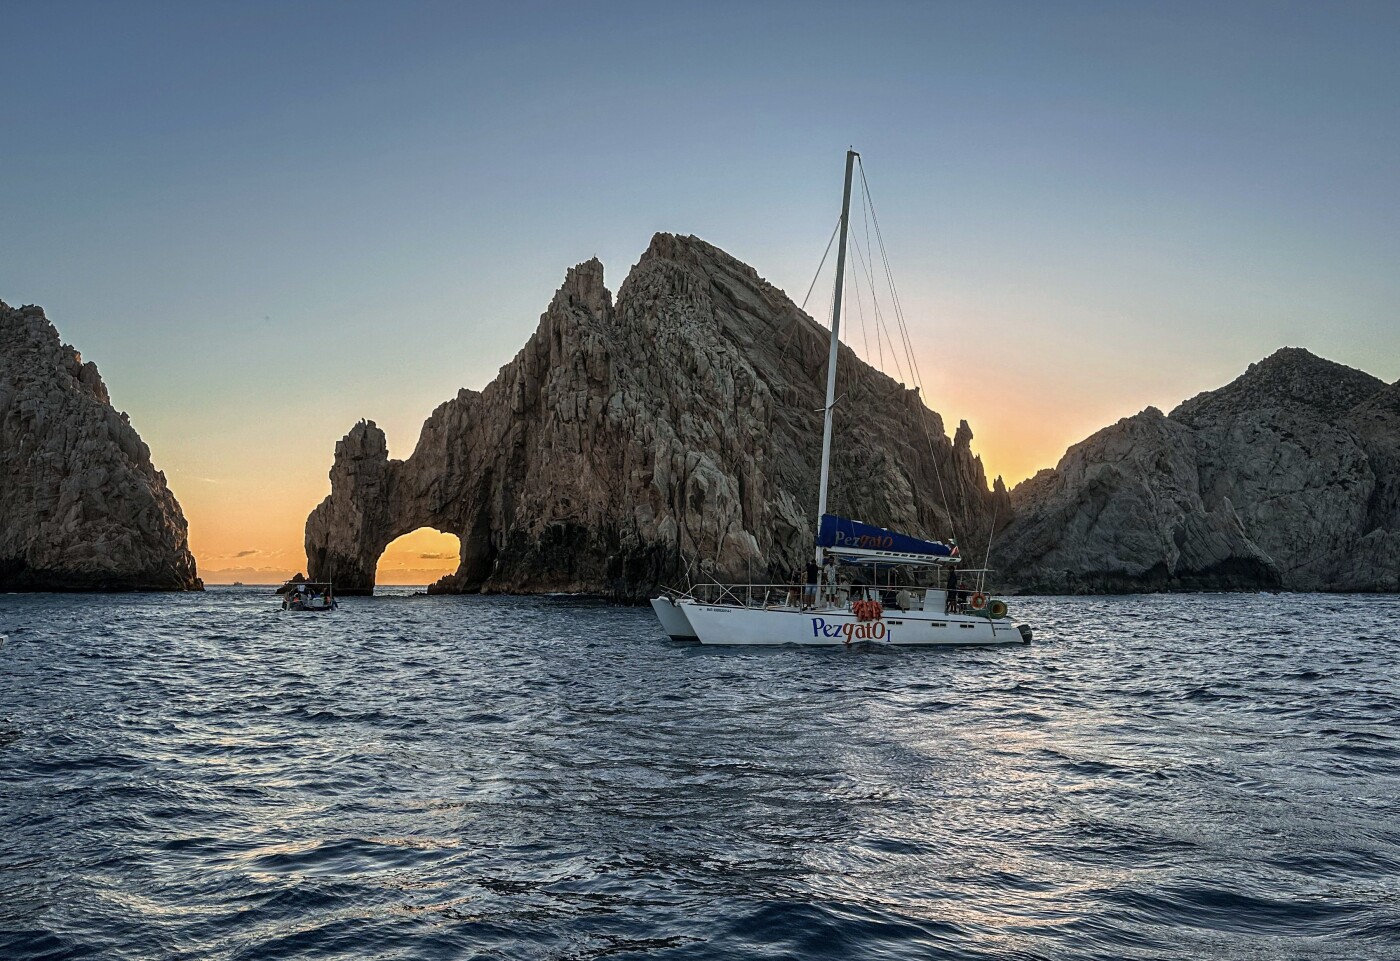 The Arch at Cabo San Lucas, Mexico marks the point where the Pacific Ocean meets the Sea of Cortez.